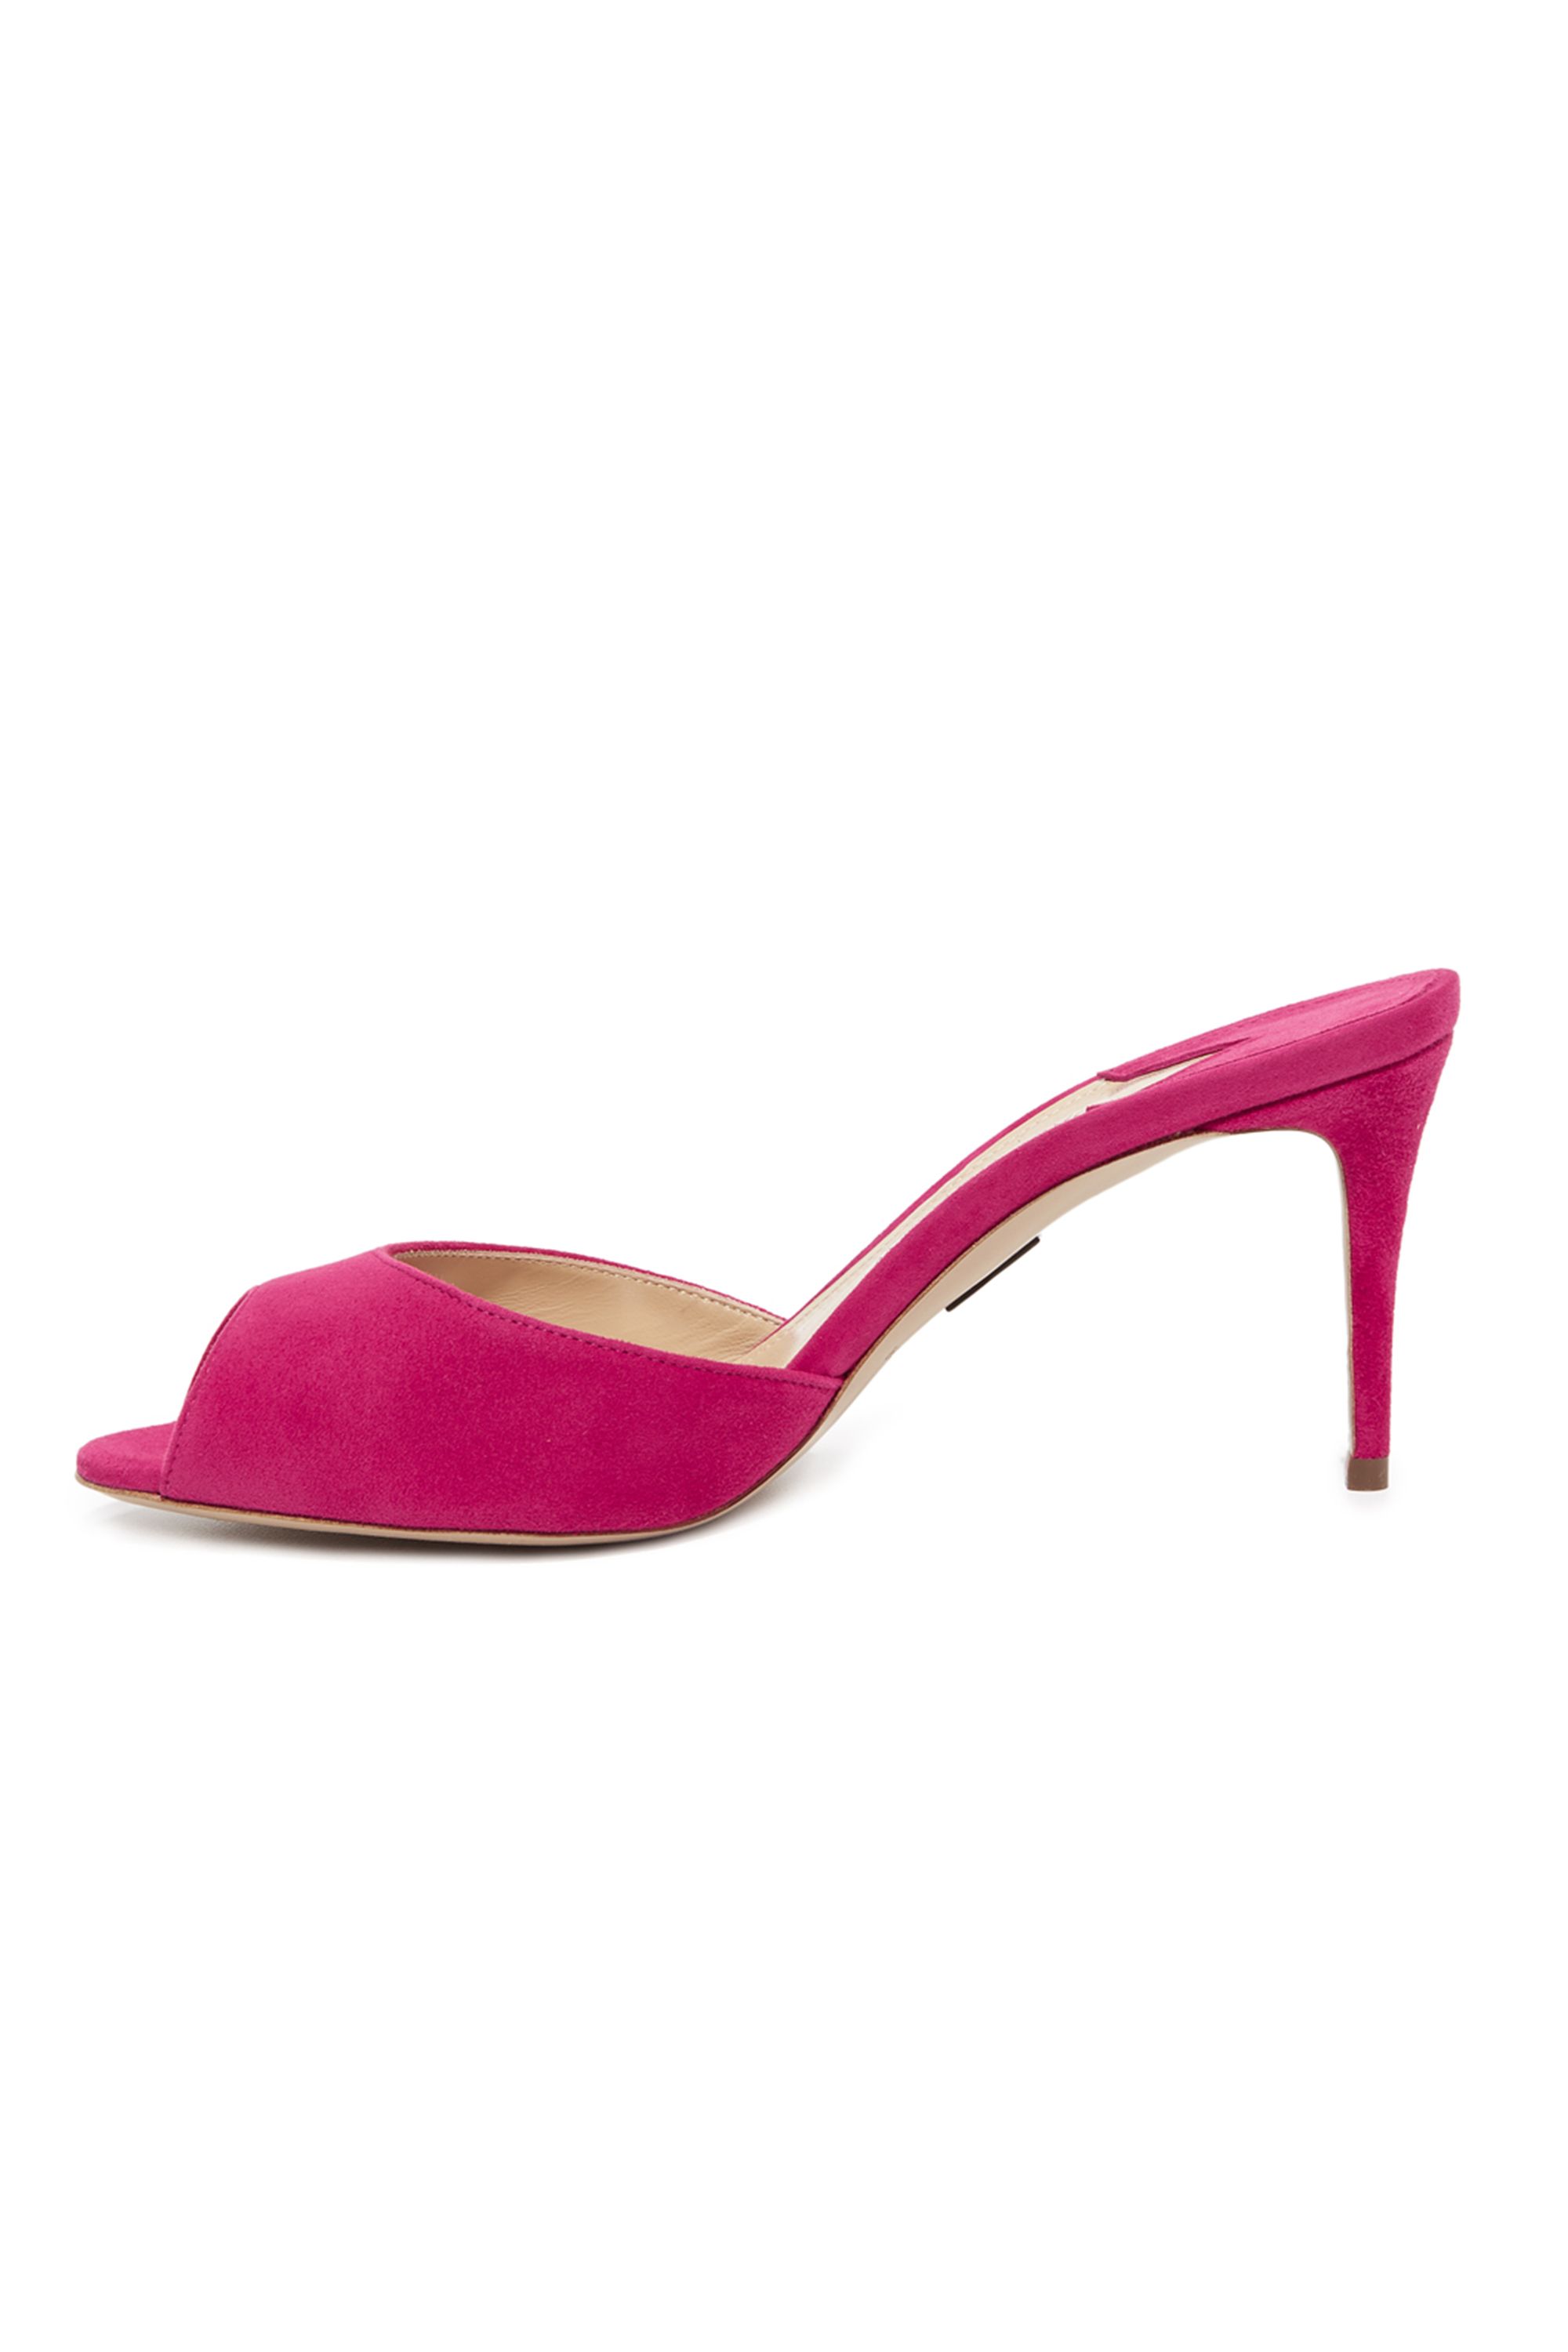 The controversial history of Barbie's classic stiletto mule heels